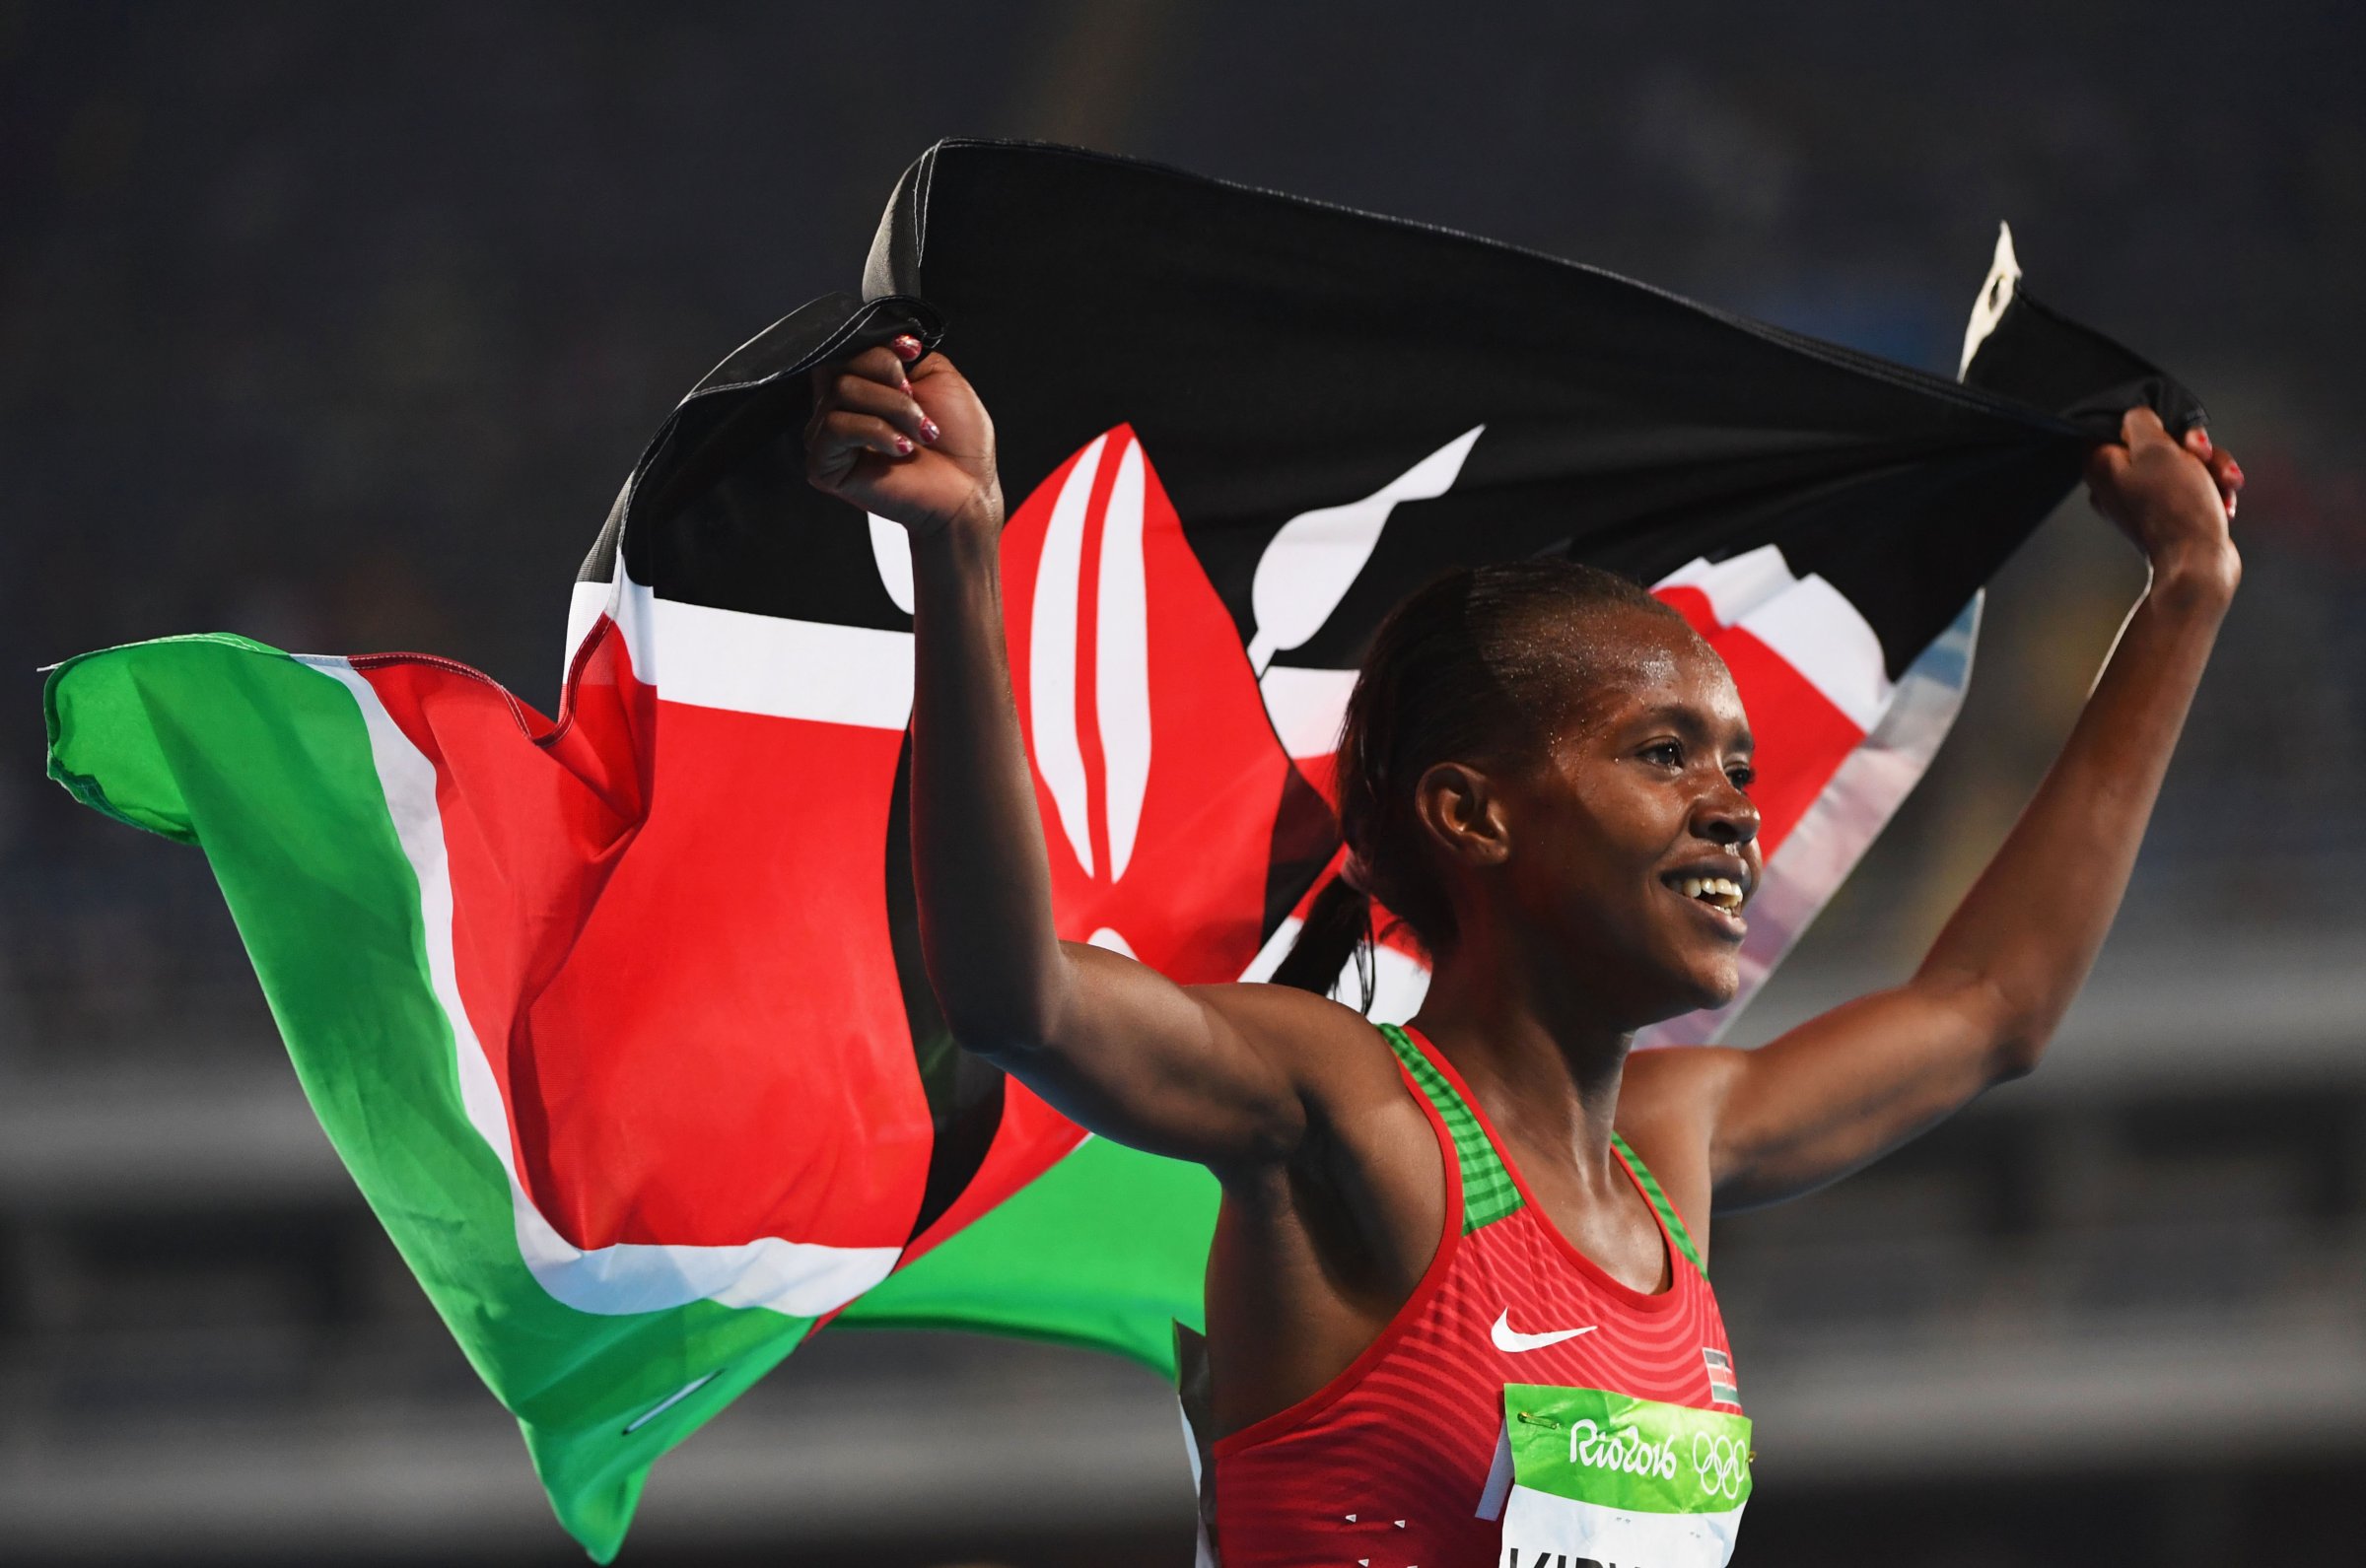 Faith Chepngetich Kipyegon of Kenya celebrates after winning the gold medal in the Women's 1500m Final on Day 11 of the Rio 2016 Olympic Games on Aug. 16, 2016.